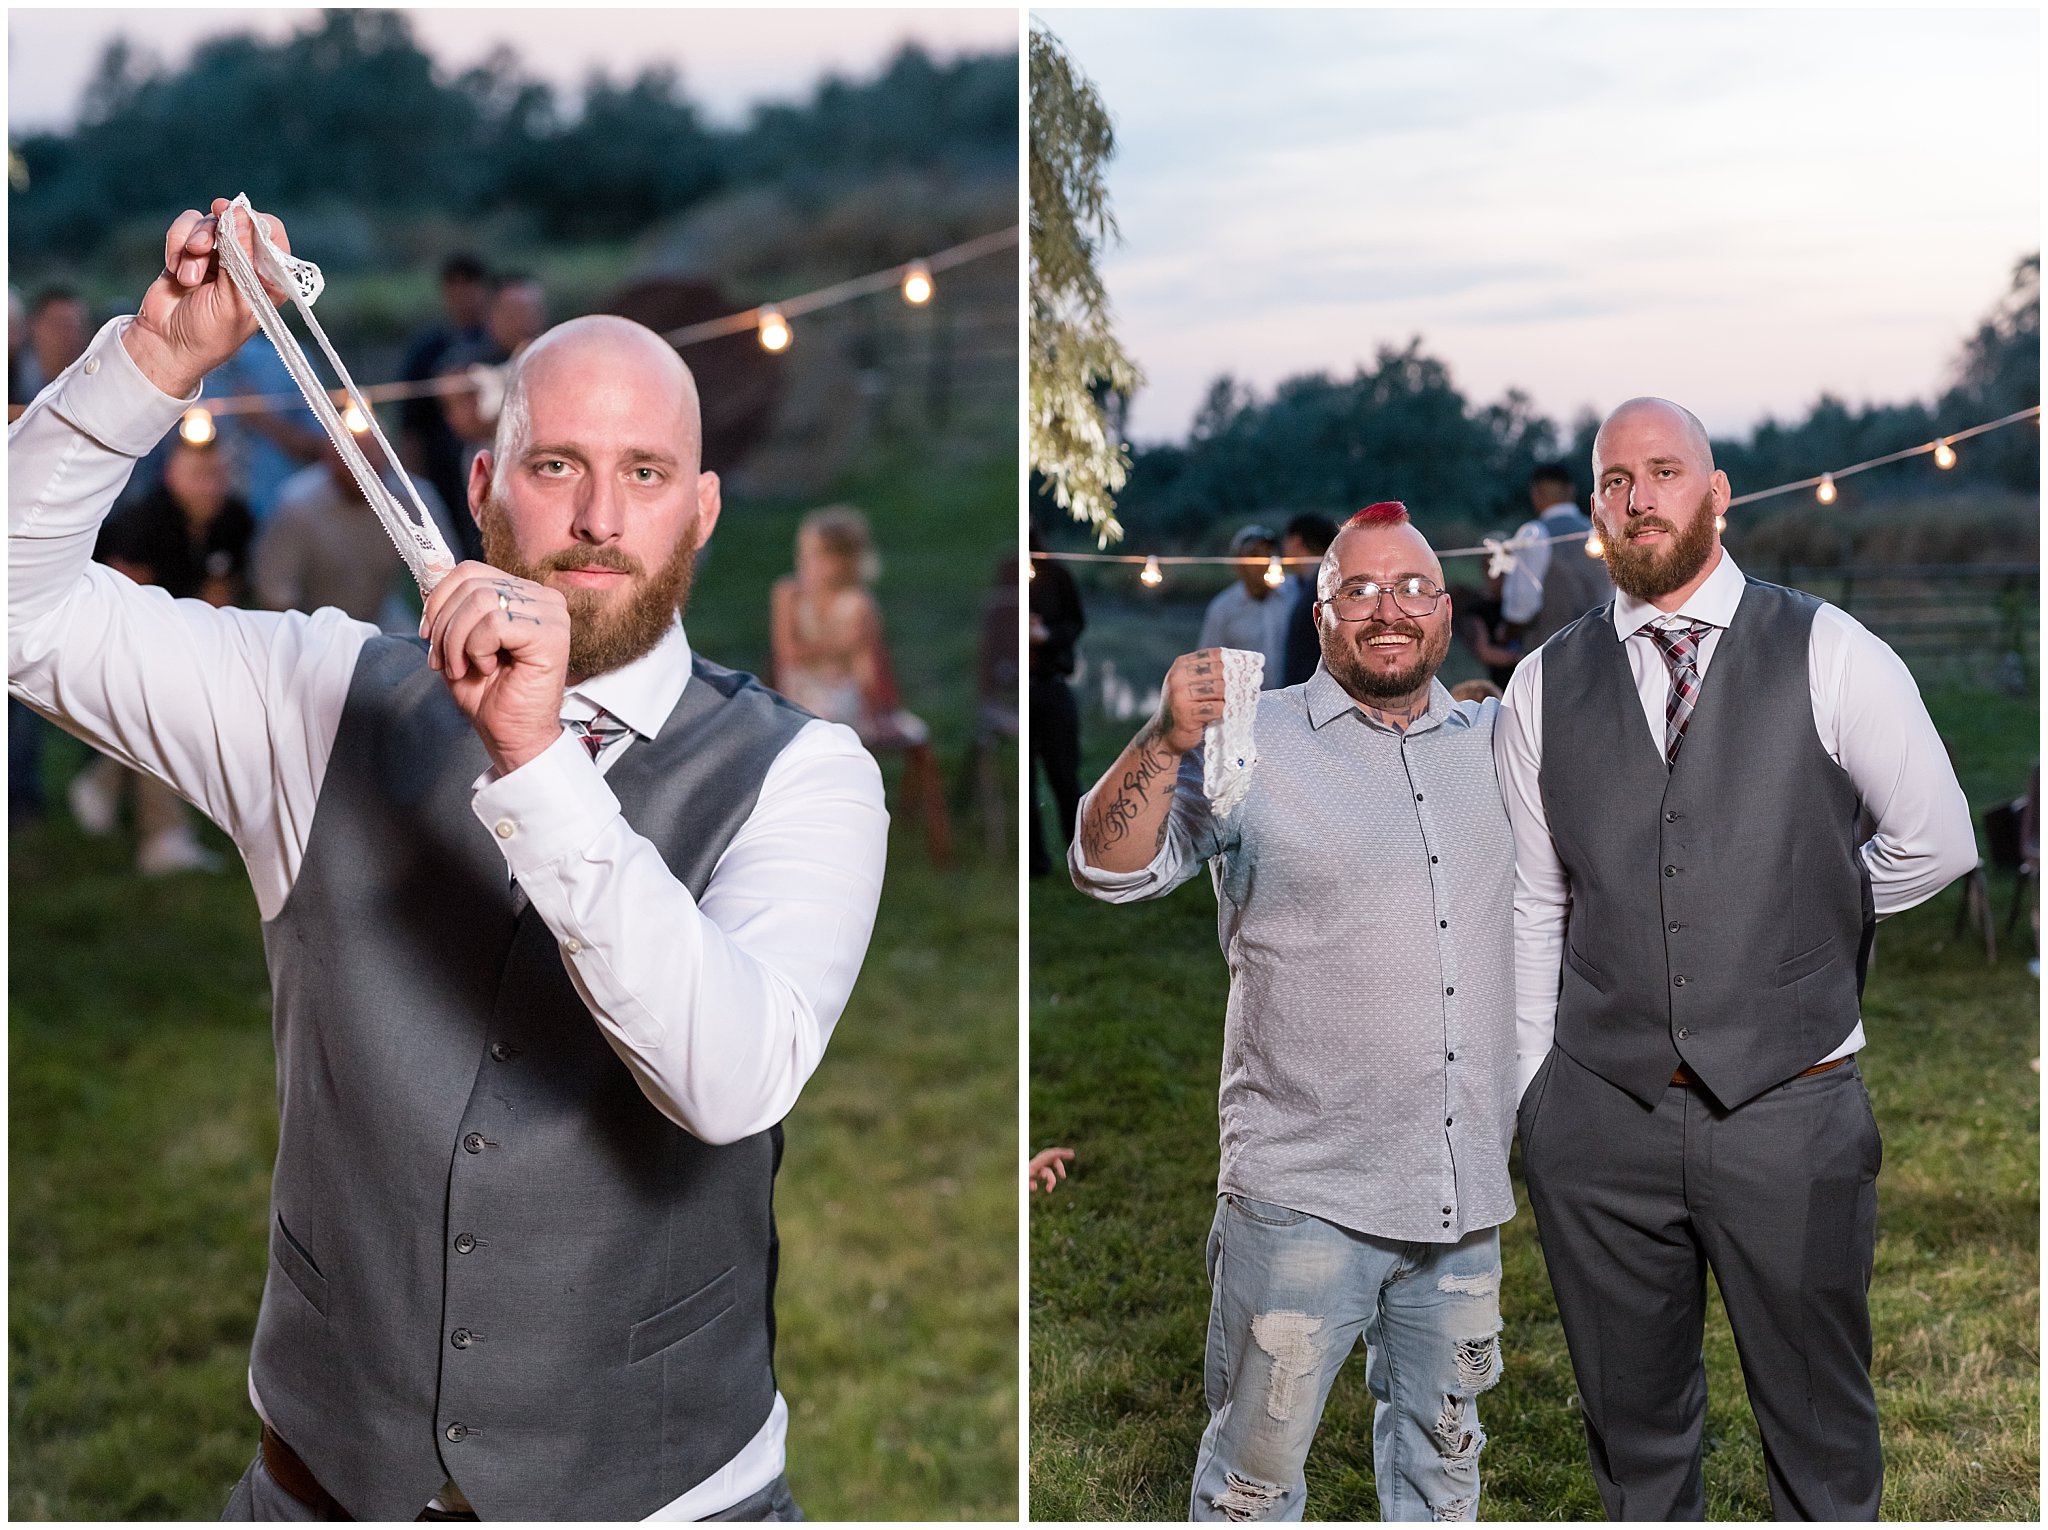 Groom tossing the garter | Red and Grey wedding | Davis County Outdoor Wedding | Jessie and Dallin Photography